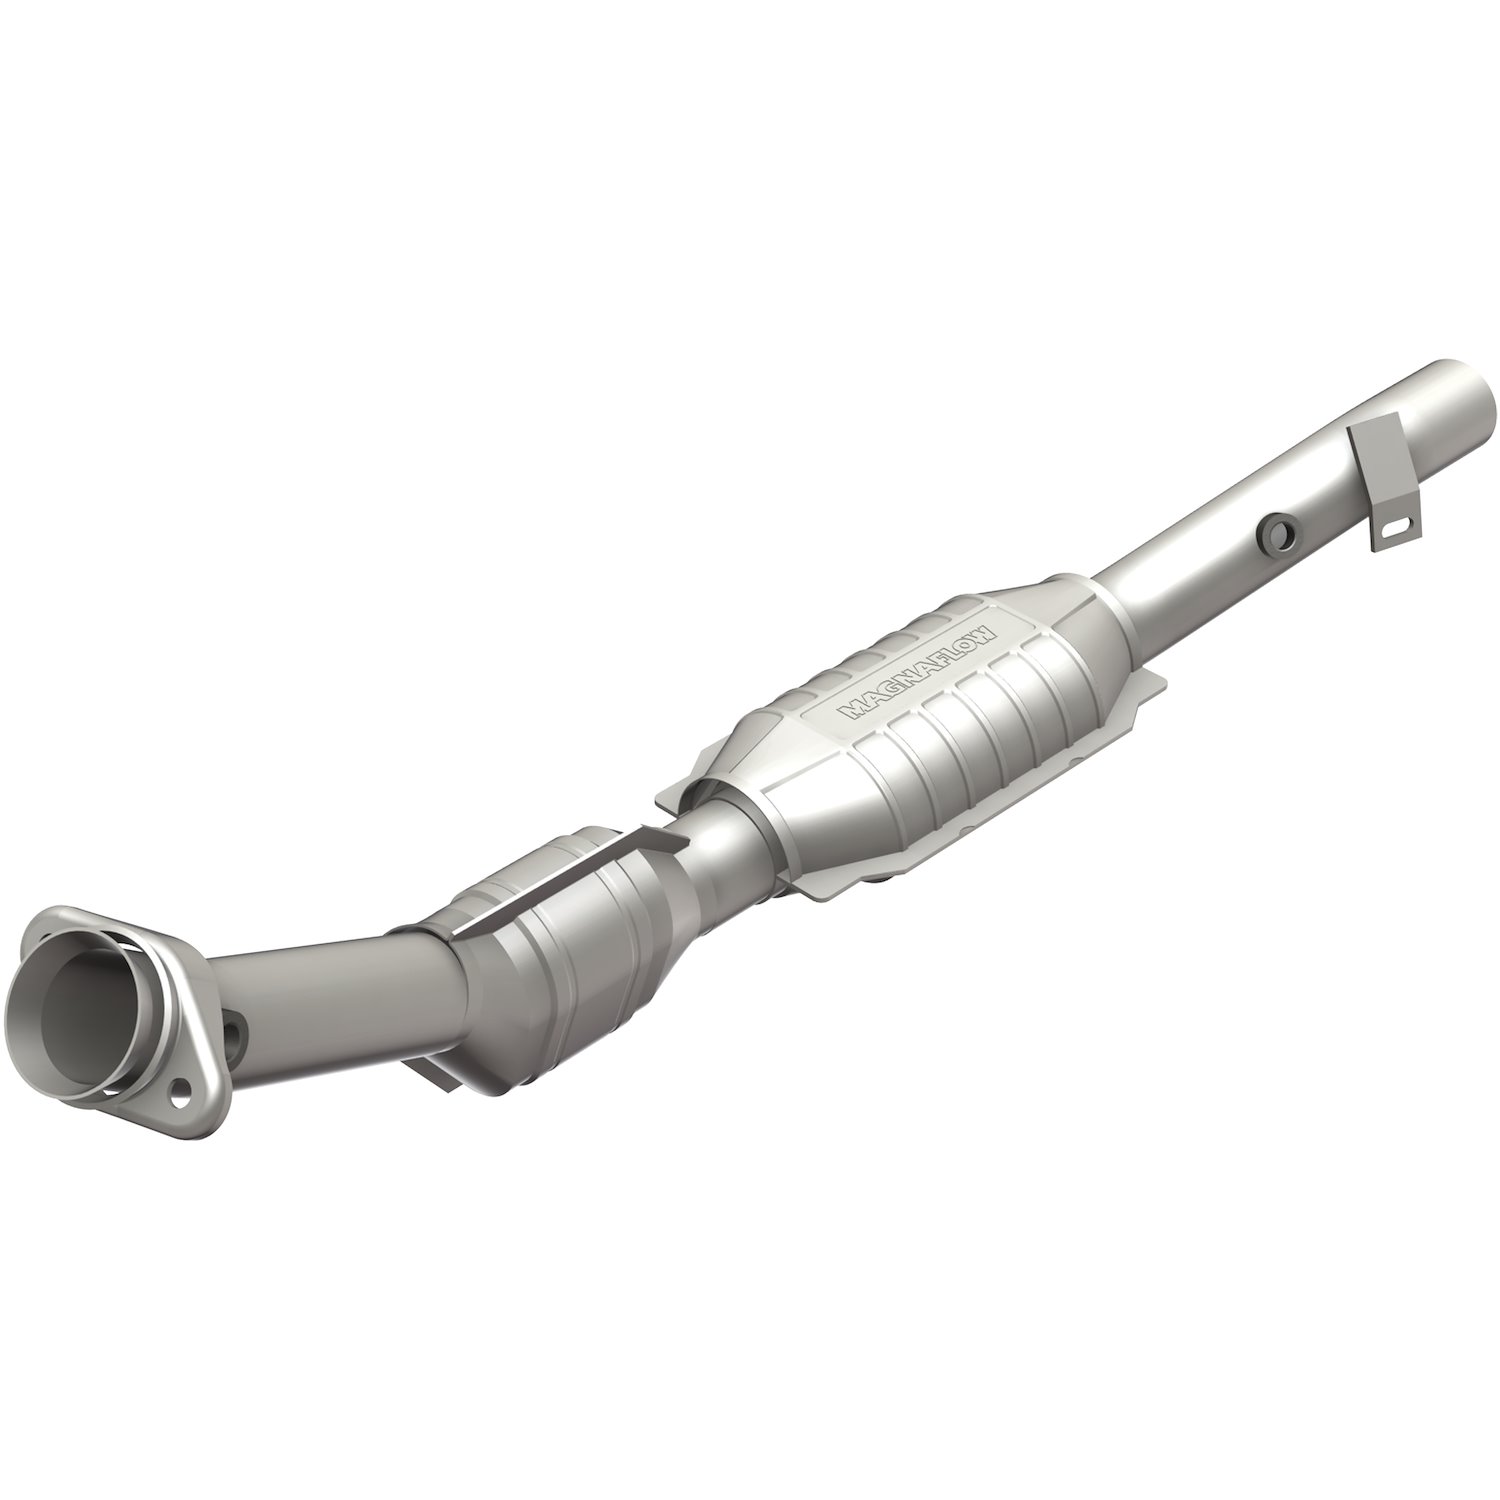 HM Grade Federal / EPA Compliant Direct-Fit Catalytic Converter 93329